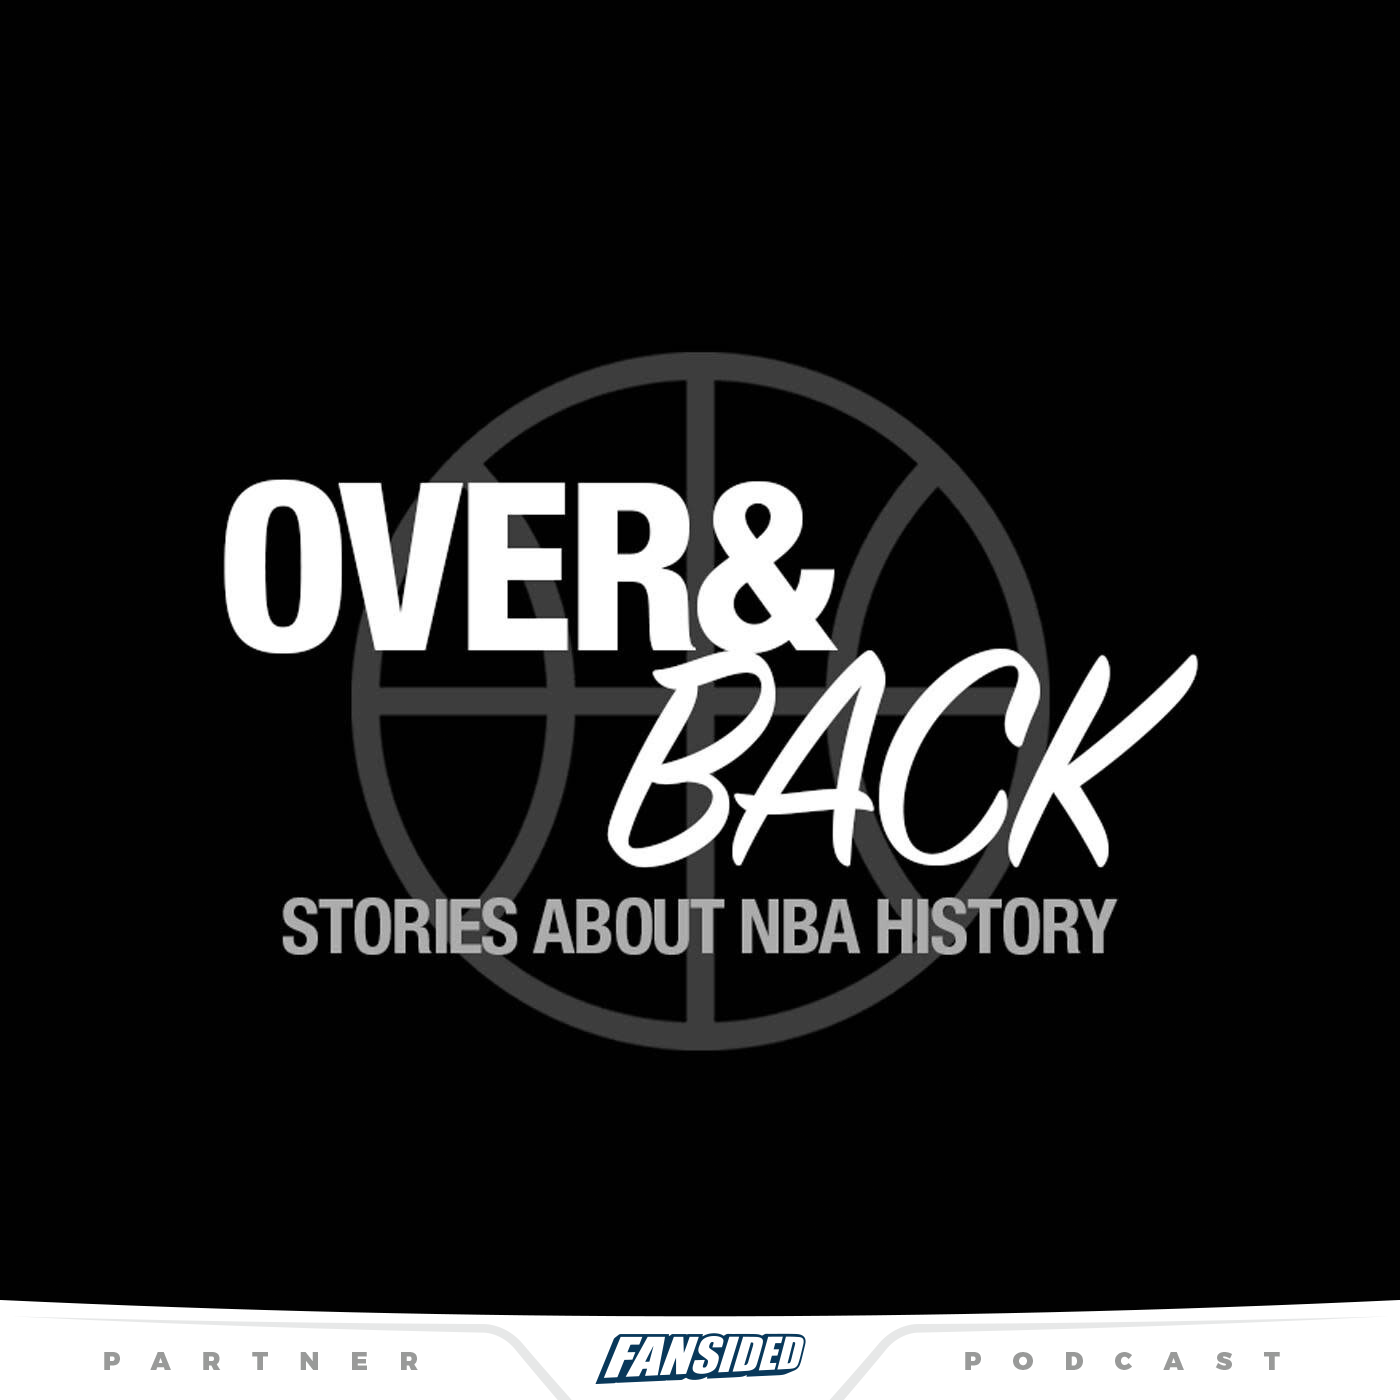 Every NBA game with four overtimes (or more)